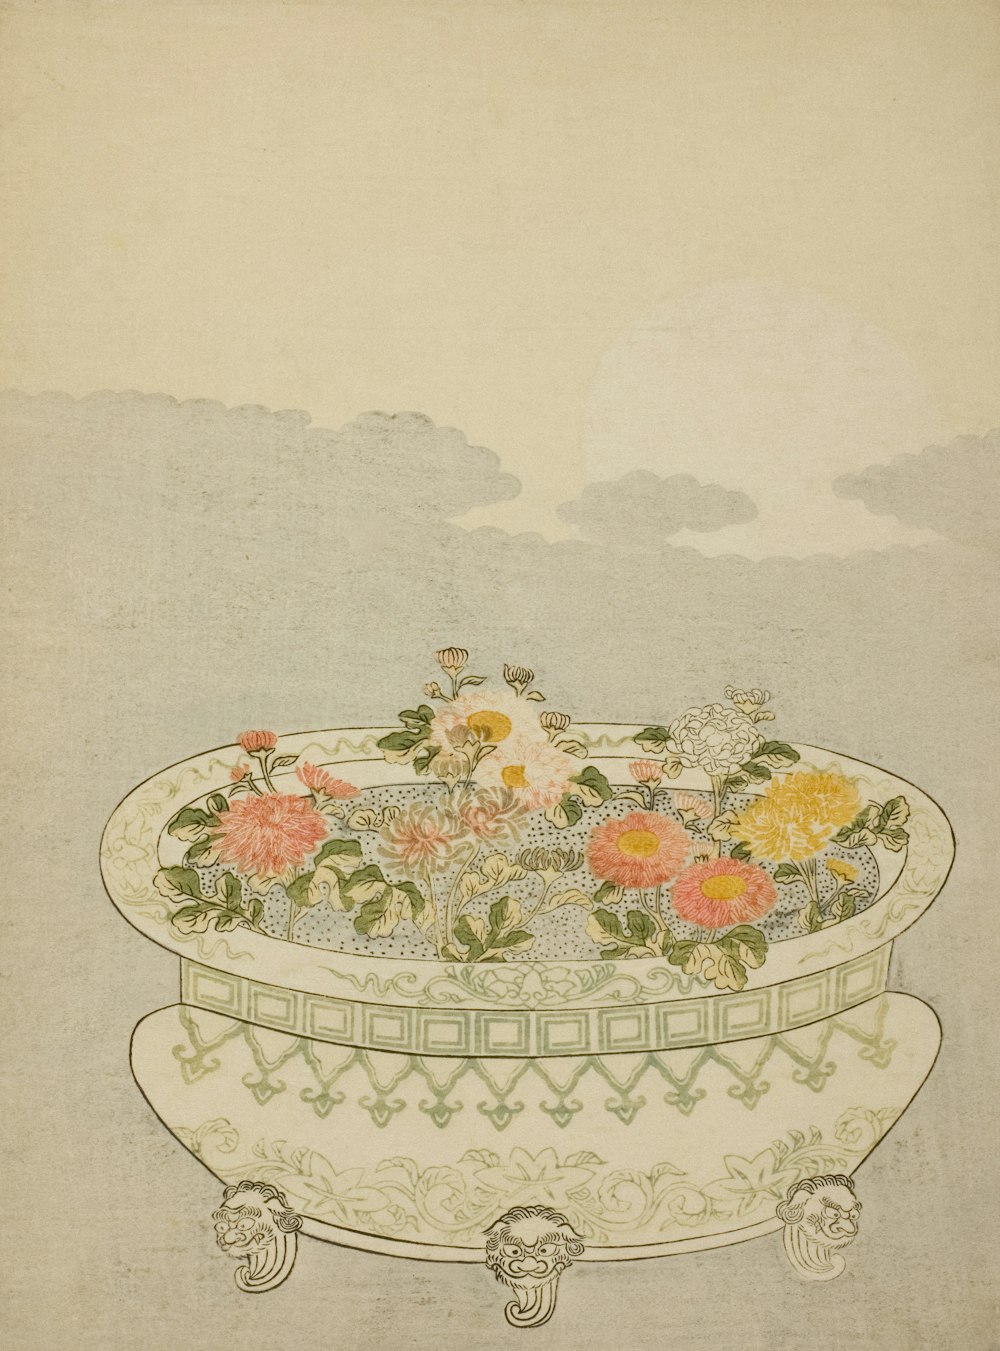 a drawing of a bowl of flowers on a table